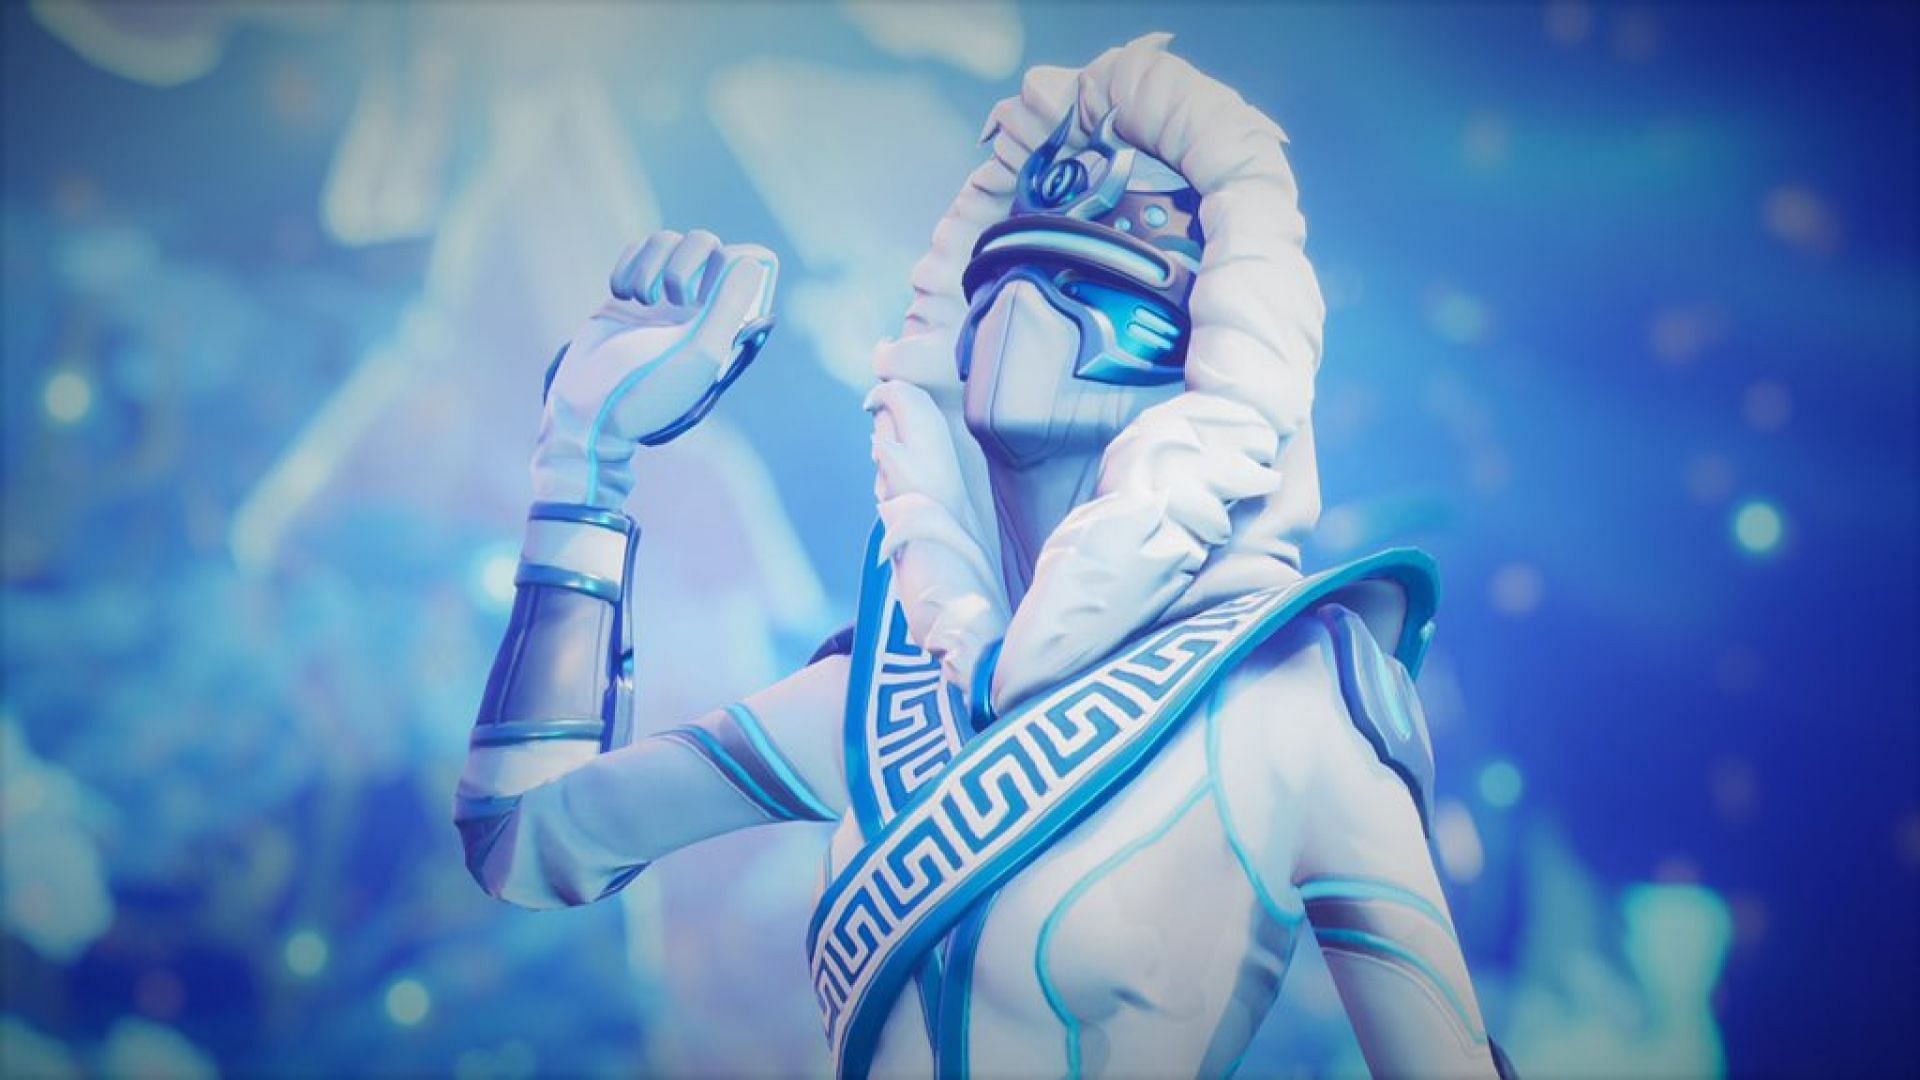 Snowfoot and Snowstrike skins in are available in the Fortnite Item Shop (Image via Epic Games/Fortnite||X/Botanicallll_)